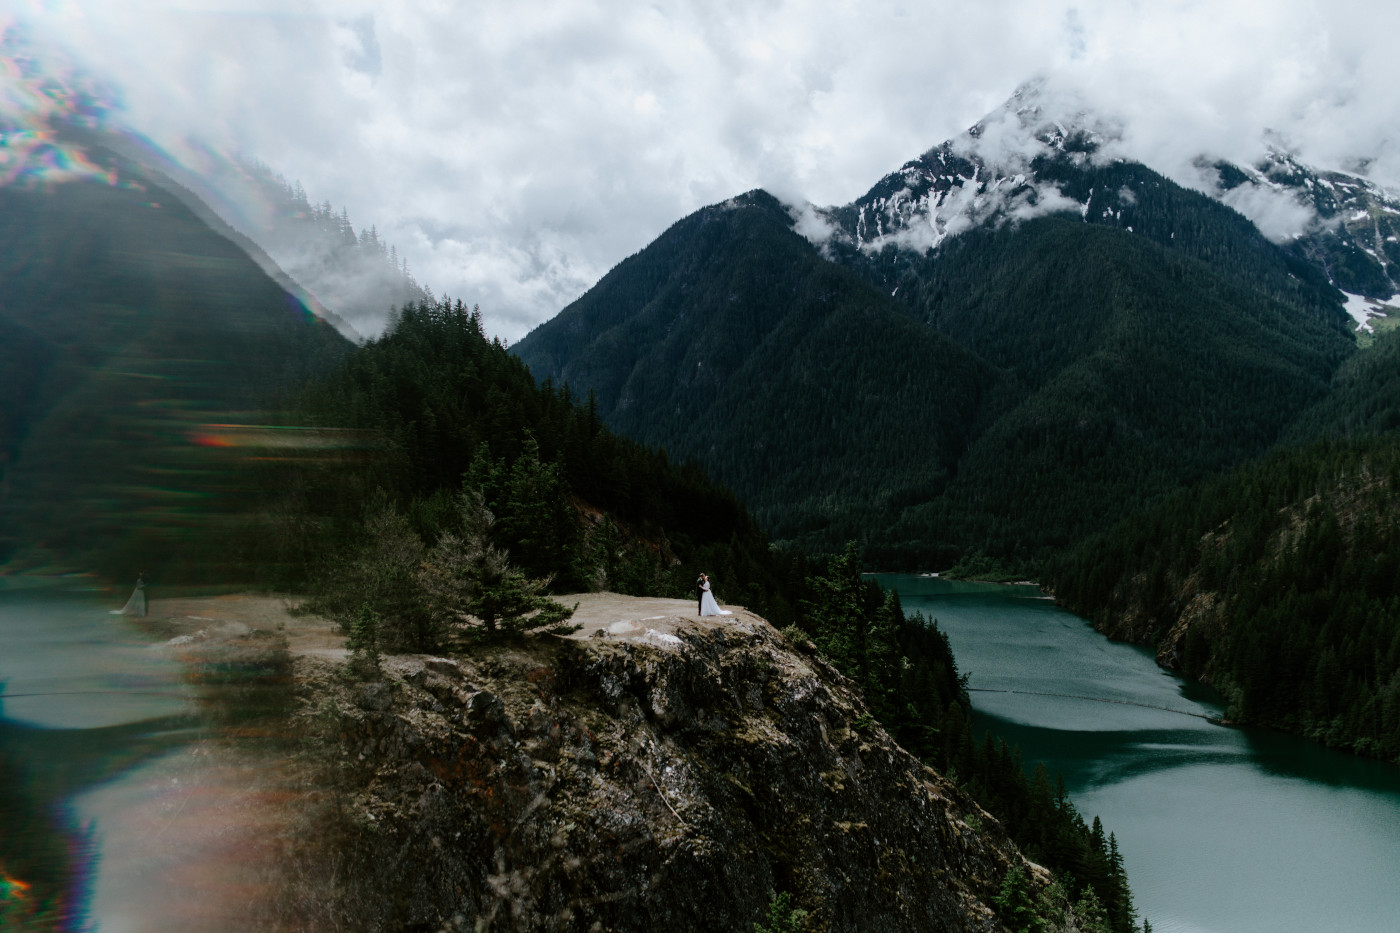 Elizabeth and Alex hug at the cliffside. Elopement photography at North Cascades National Park by Sienna Plus Josh.